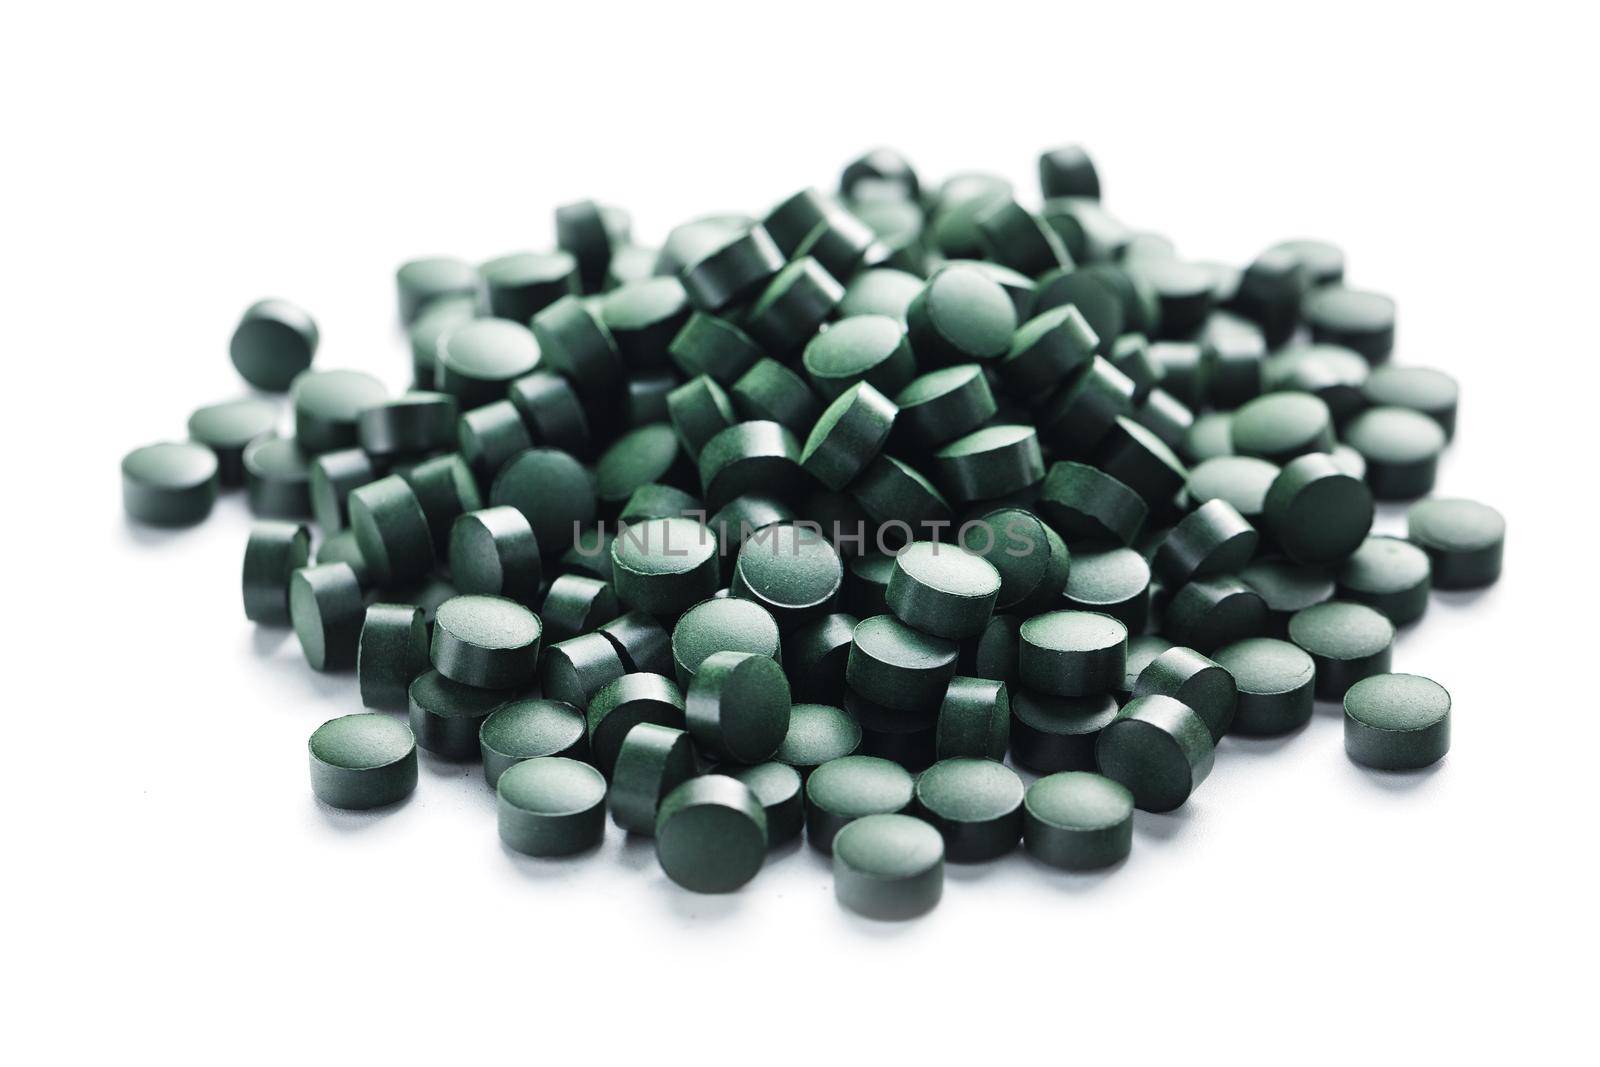 Vegetarian vitamins from Spirulina are scattered on a white background with free space